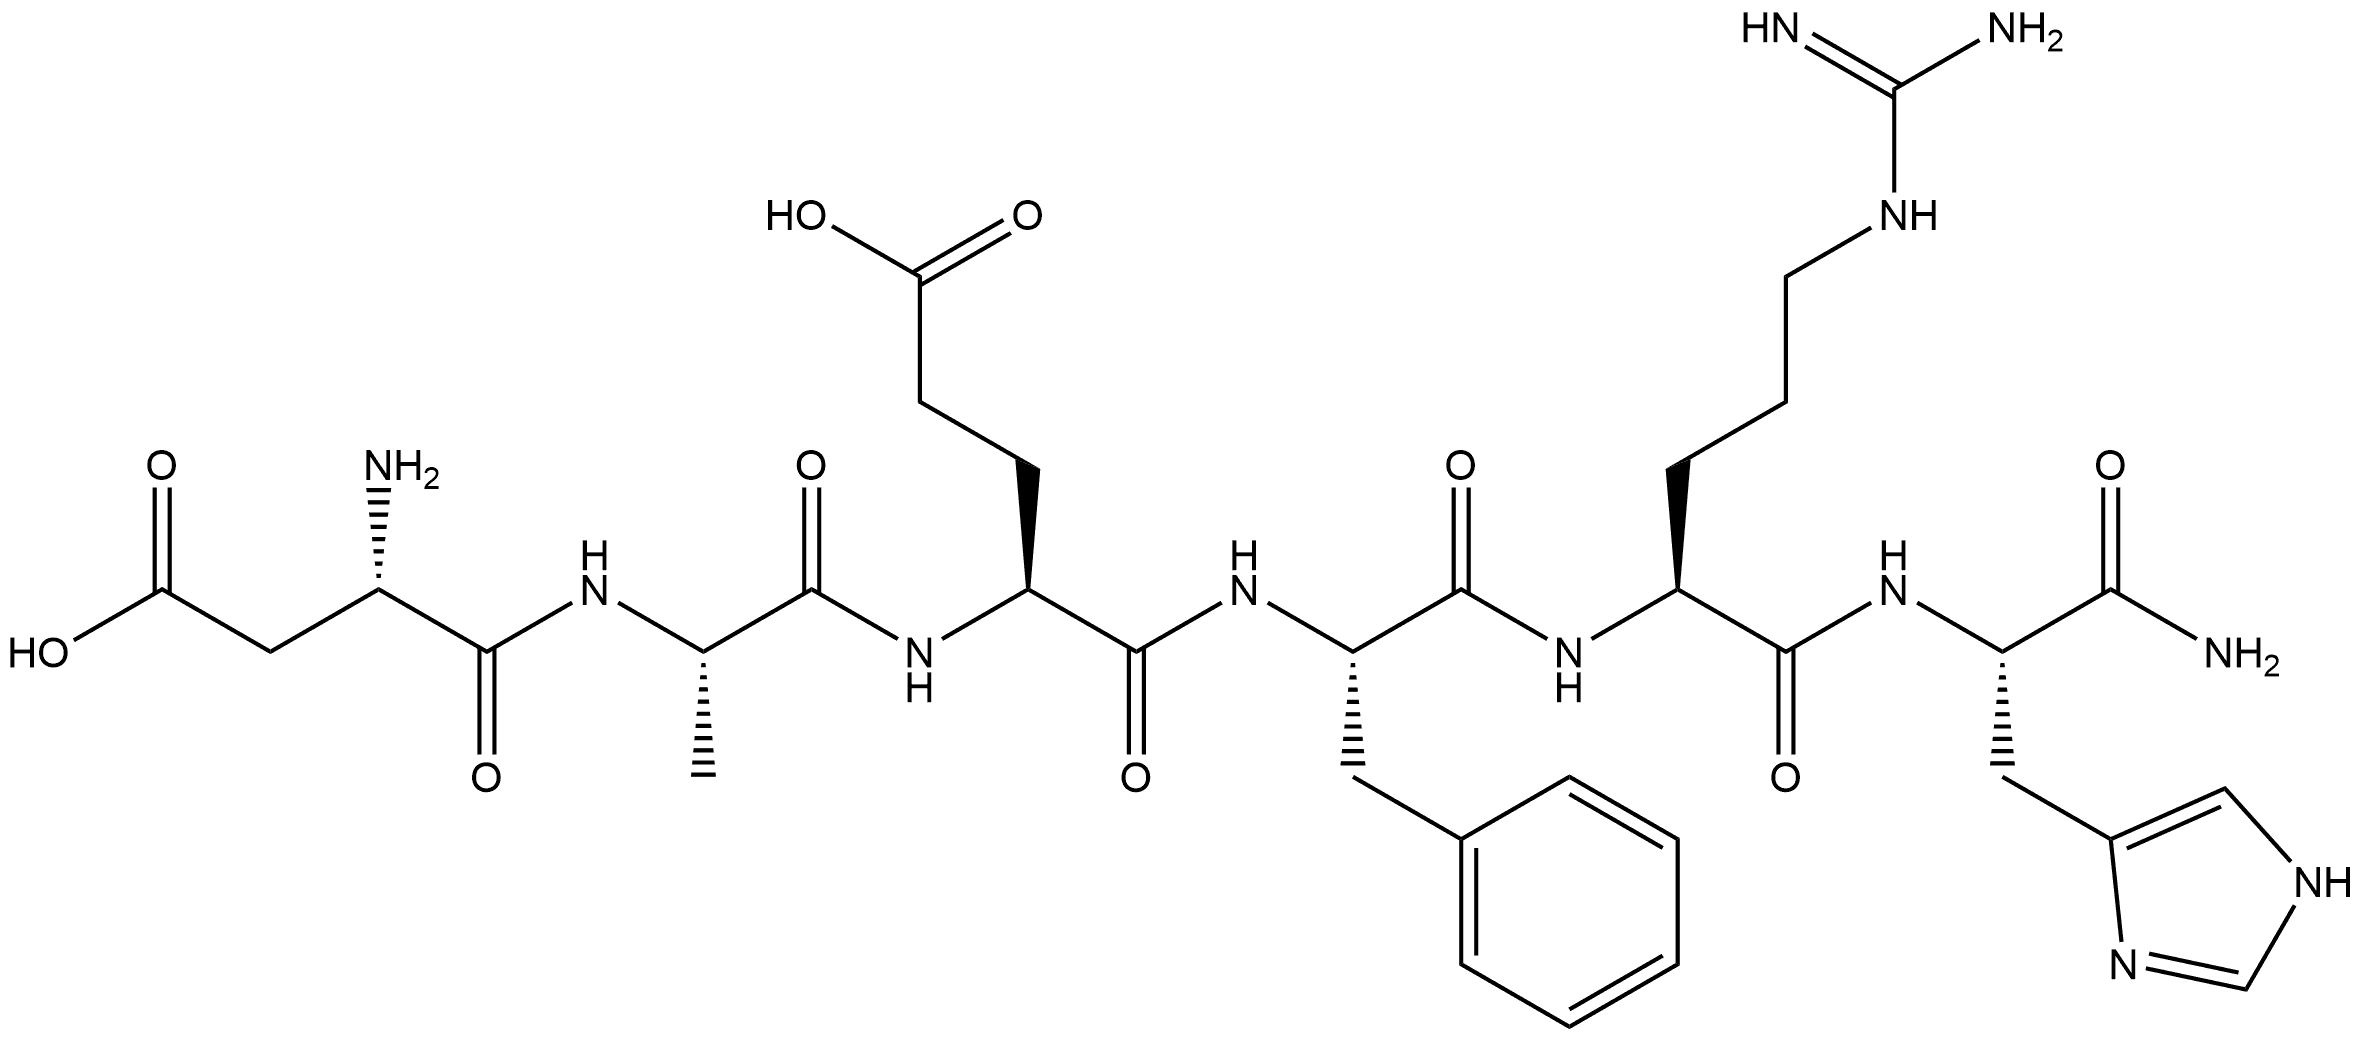 903883-21-6 AMYLOID Β-PROTEIN (1-6) AMIDE